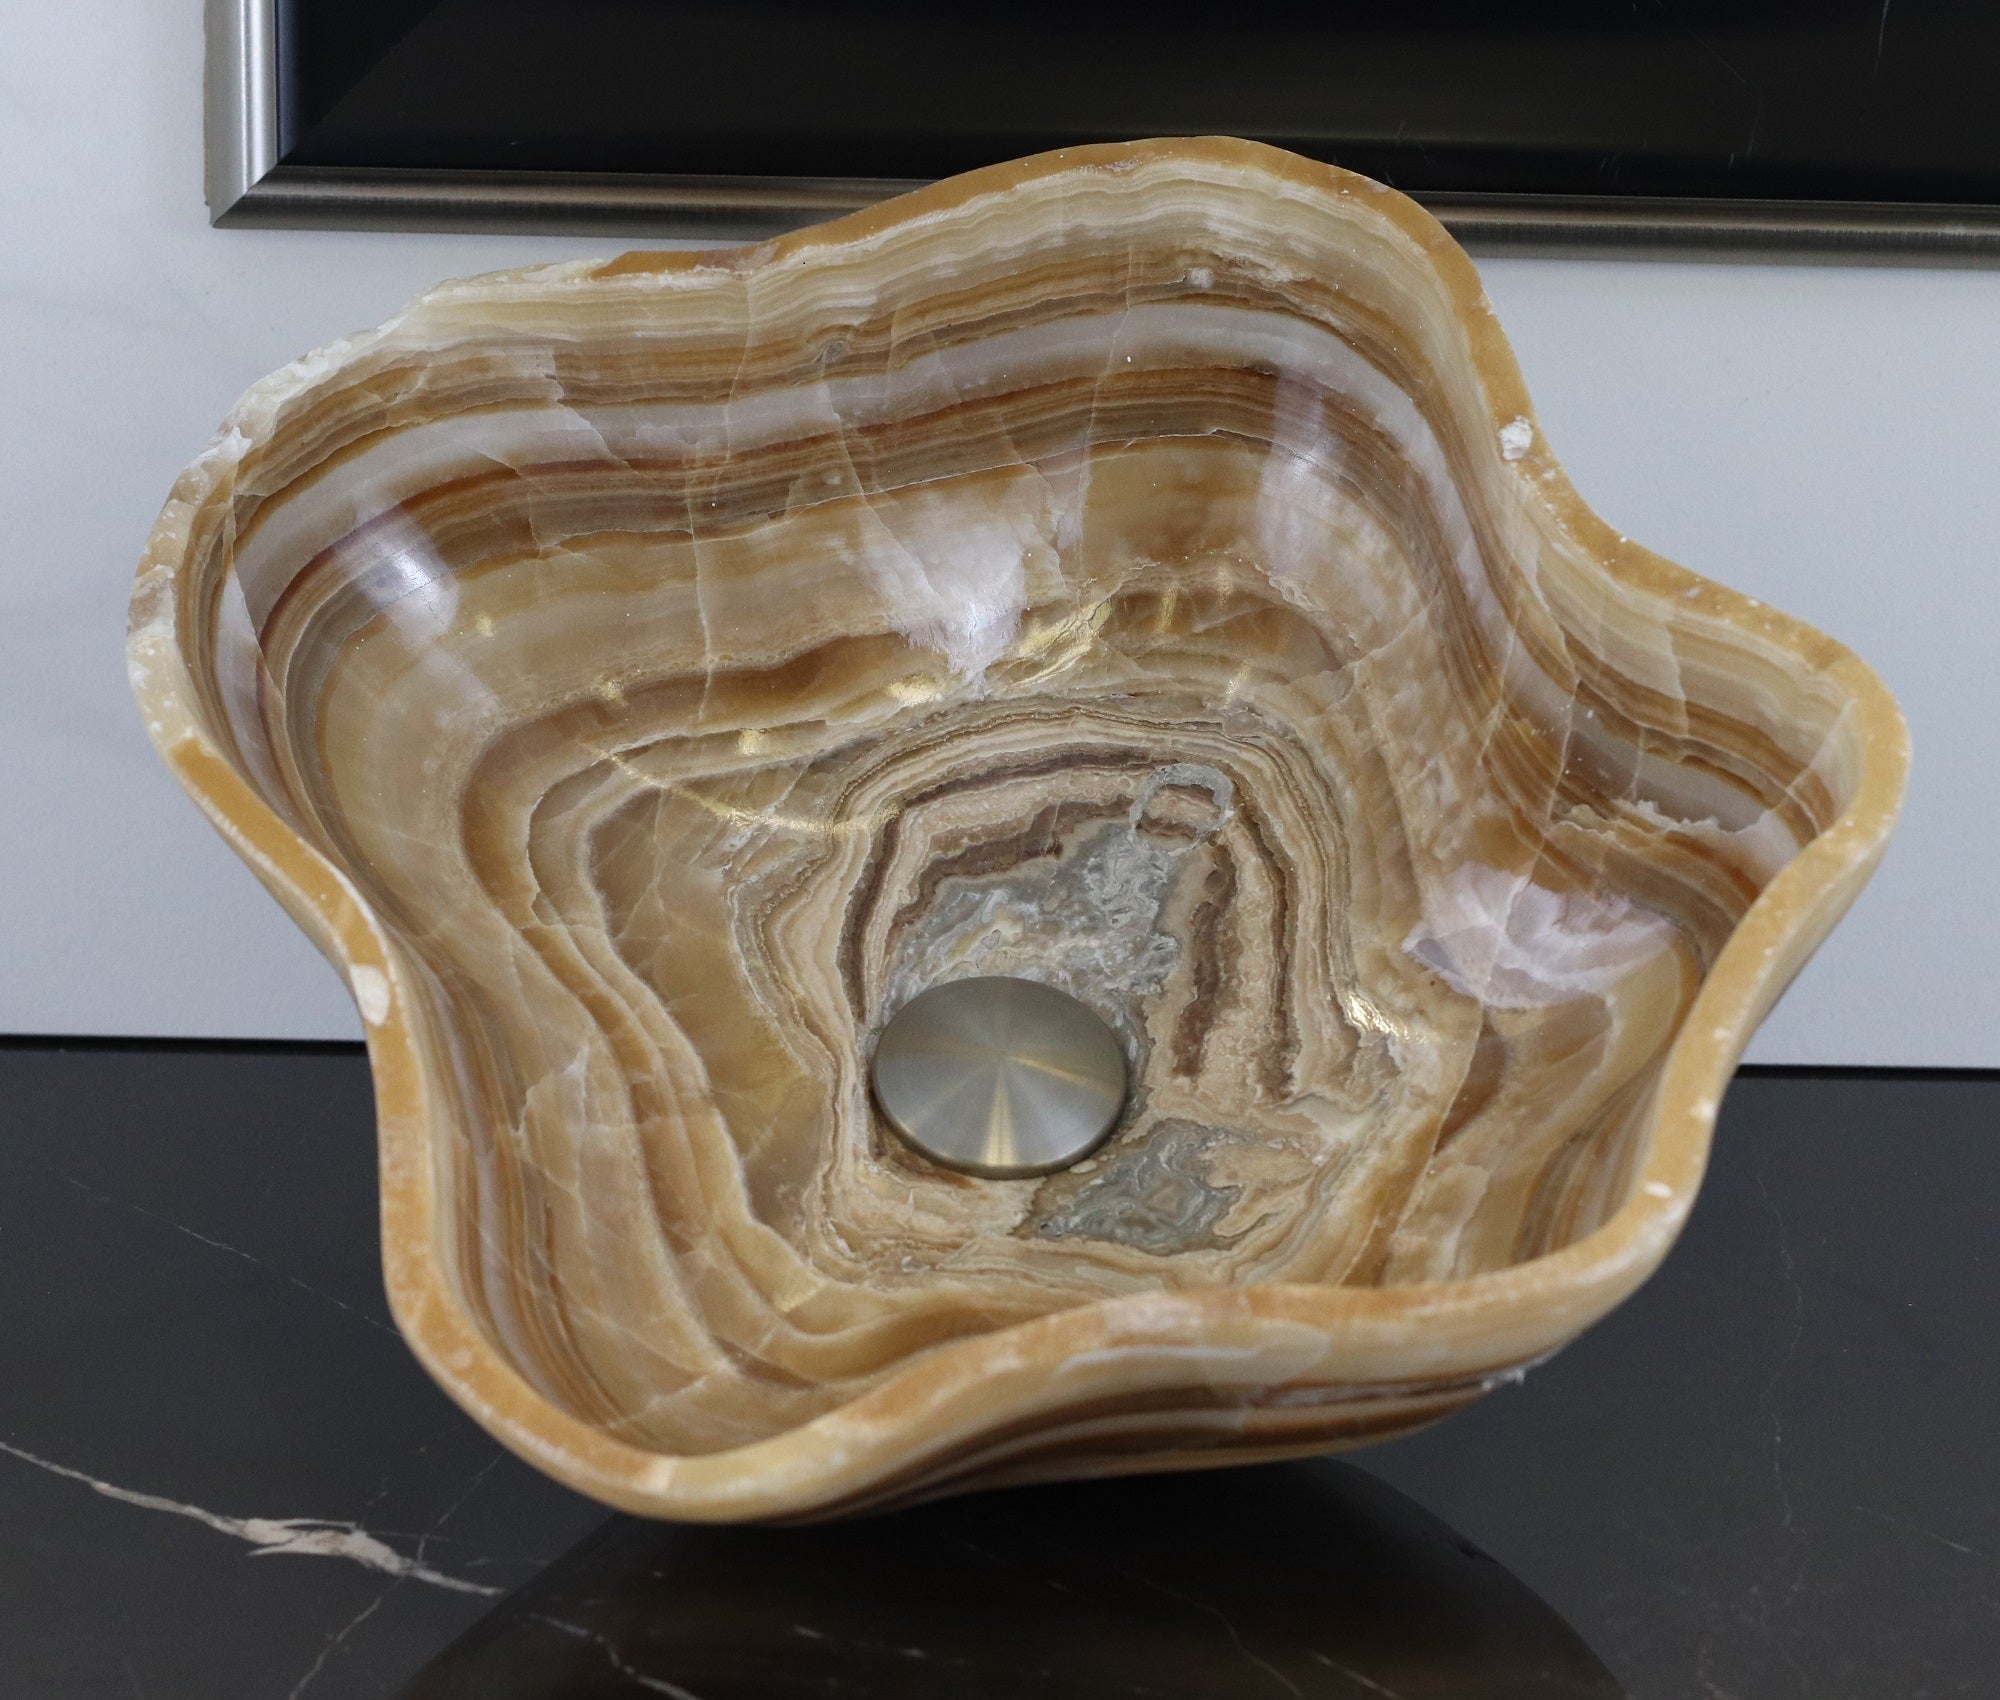 Brown and Tan Wavy Polished Vessel Sink. A beautiful work of art. We offer fast shipping. Handmade in Mexico. We hand finish, package, and ship from the USA. Buy now at www.felipeandgrace.com. 